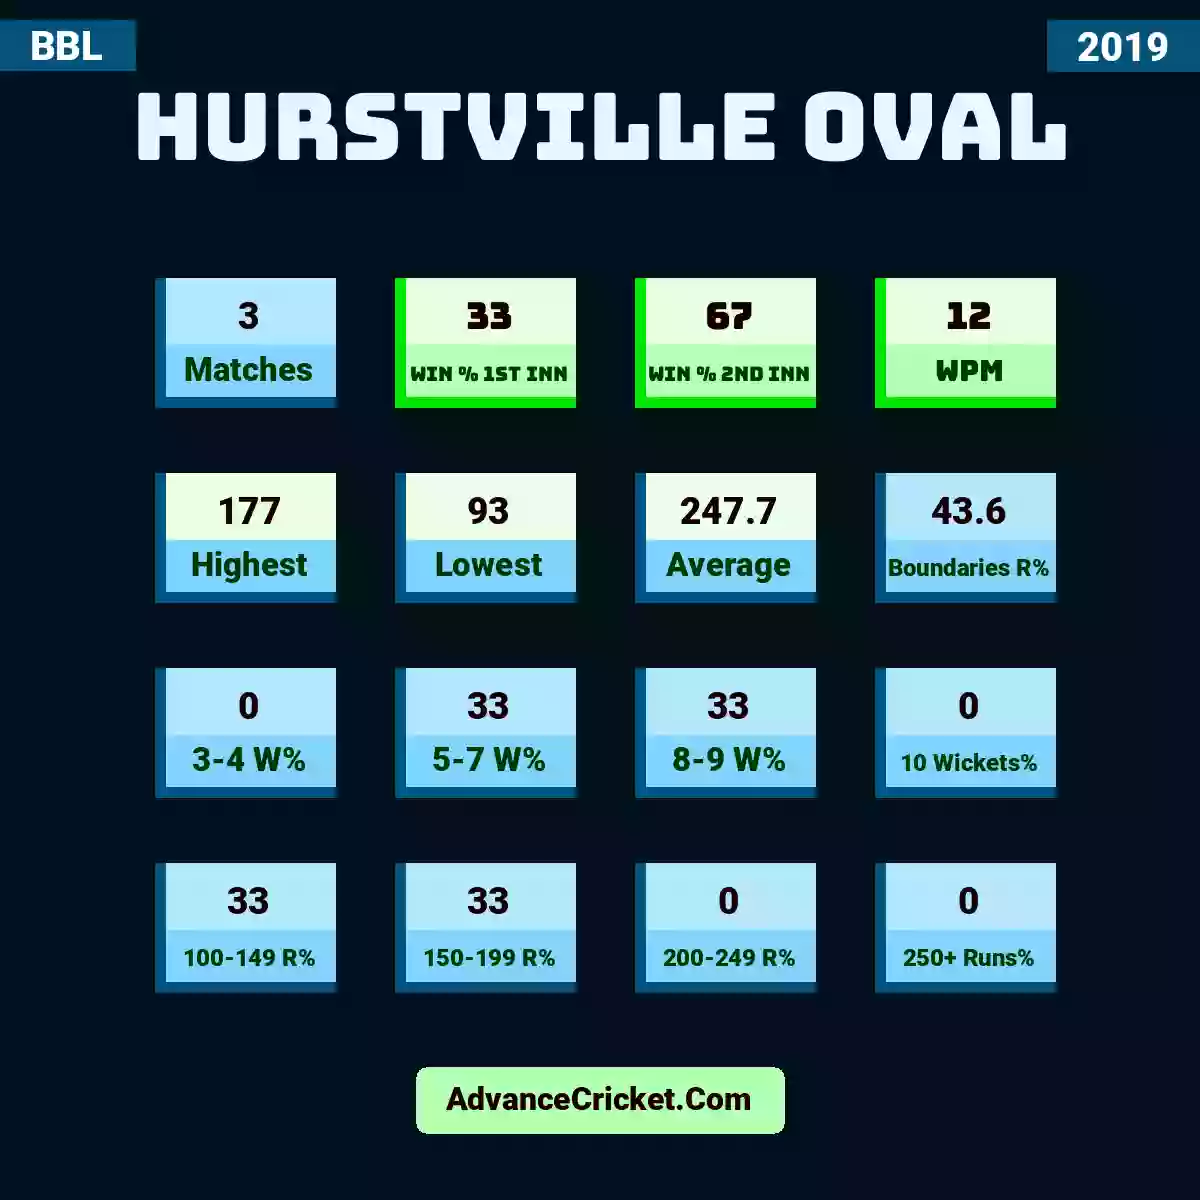 Image showing Hurstville Oval with Matches: 3, Win % 1st Inn: 33, Win % 2nd Inn: 67, WPM: 12, Highest: 177, Lowest: 93, Average: 247.7, Boundaries R%: 43.6, 3-4 W%: 0, 5-7 W%: 33, 8-9 W%: 33, 10 Wickets%: 0, 100-149 R%: 33, 150-199 R%: 33, 200-249 R%: 0, 250+ Runs%: 0.